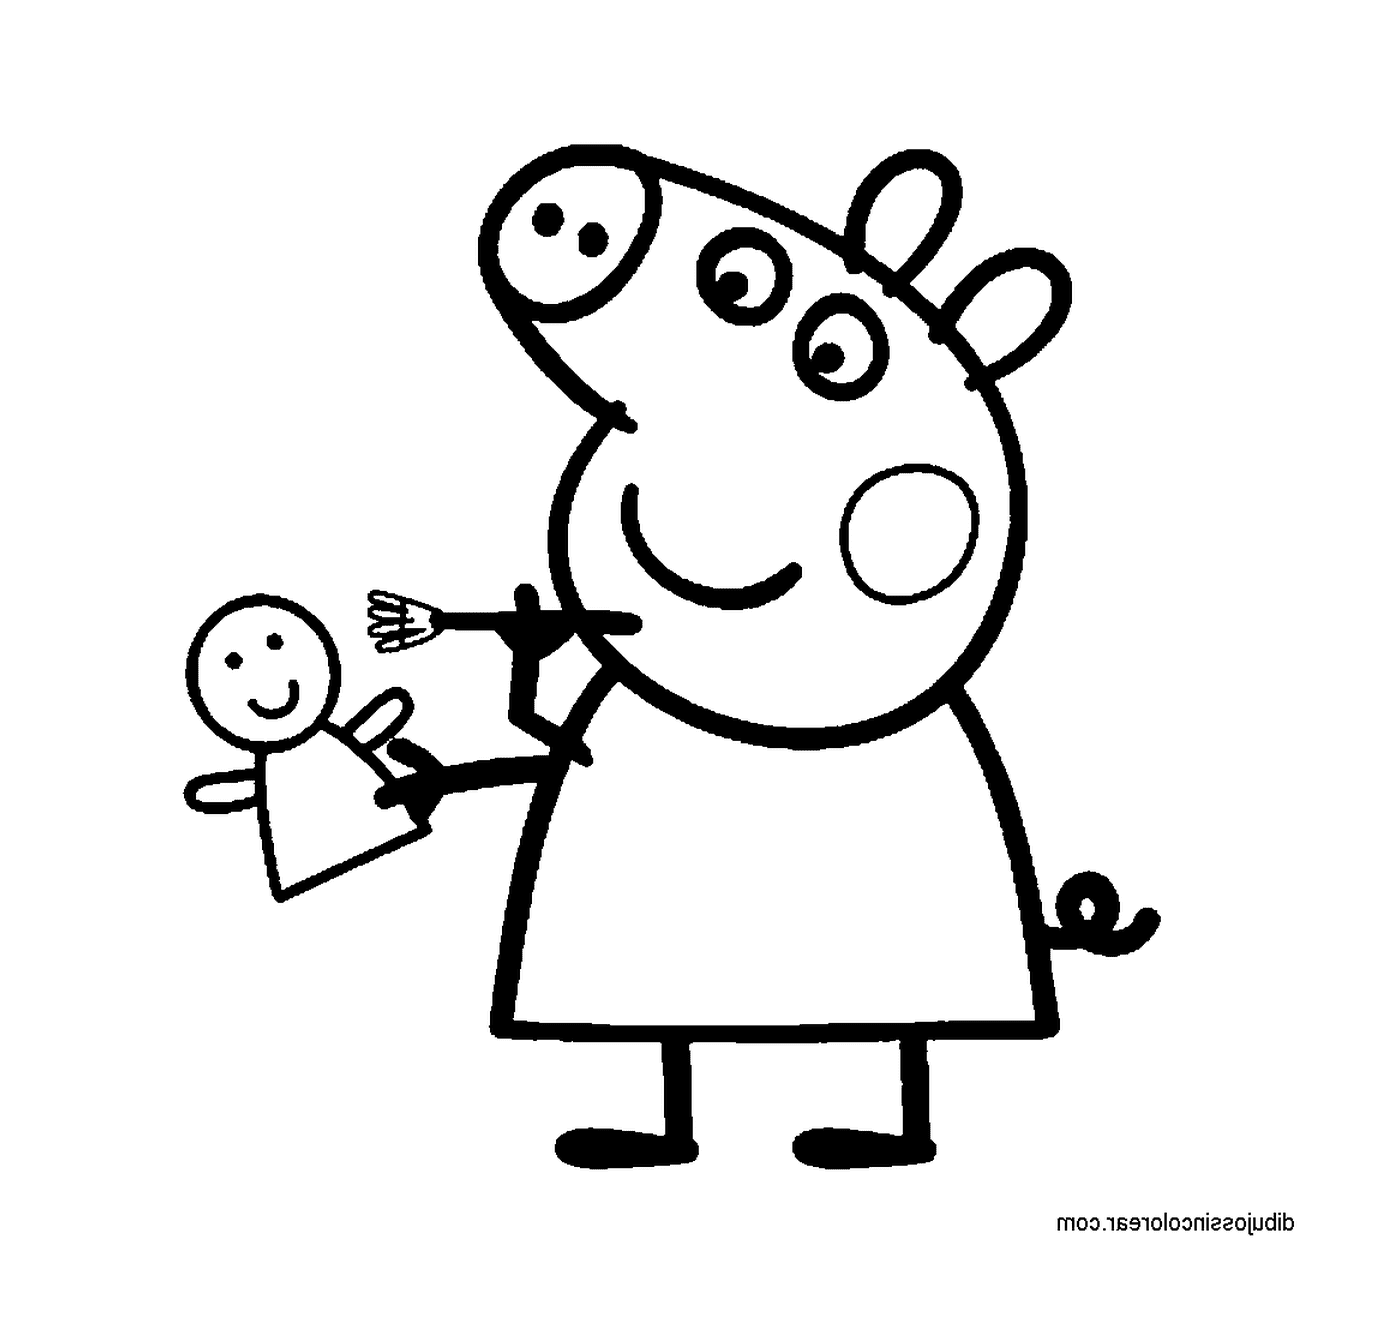  Peppa Pig holding a doll 